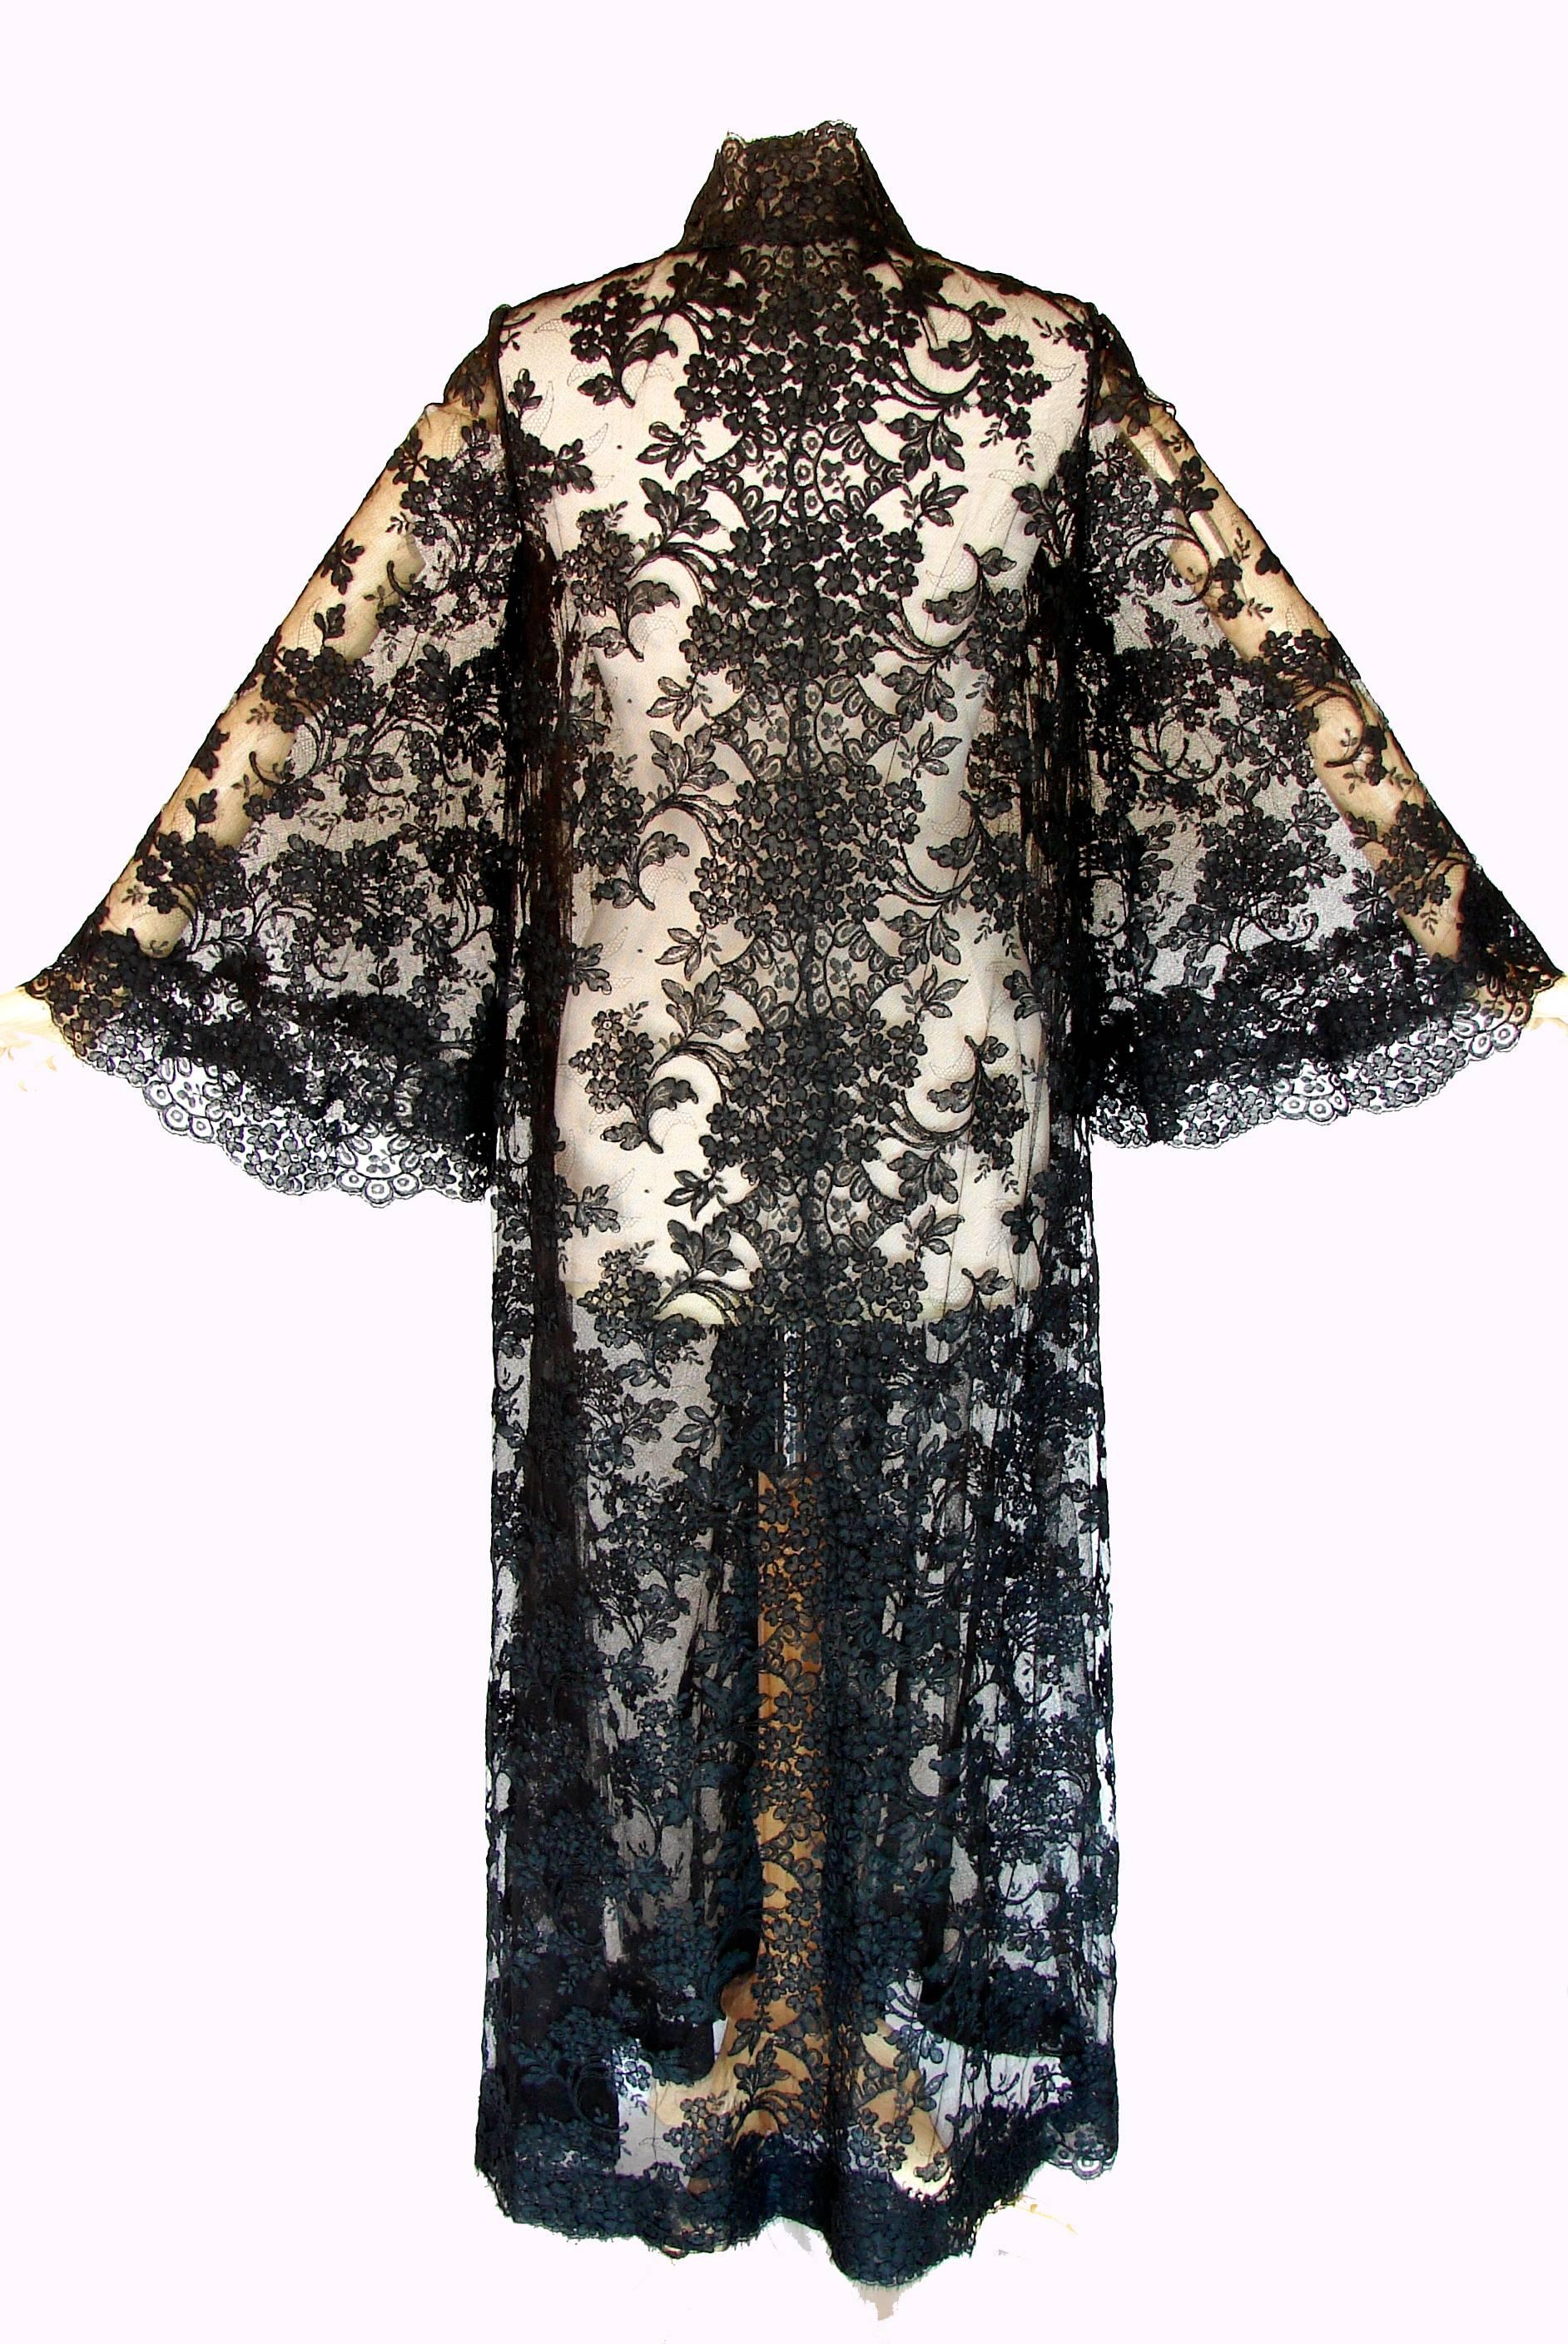 Ron Amey Attr. Fabulous Black Lace Opera Coat with Angel Sleeves Size M 1970s 3